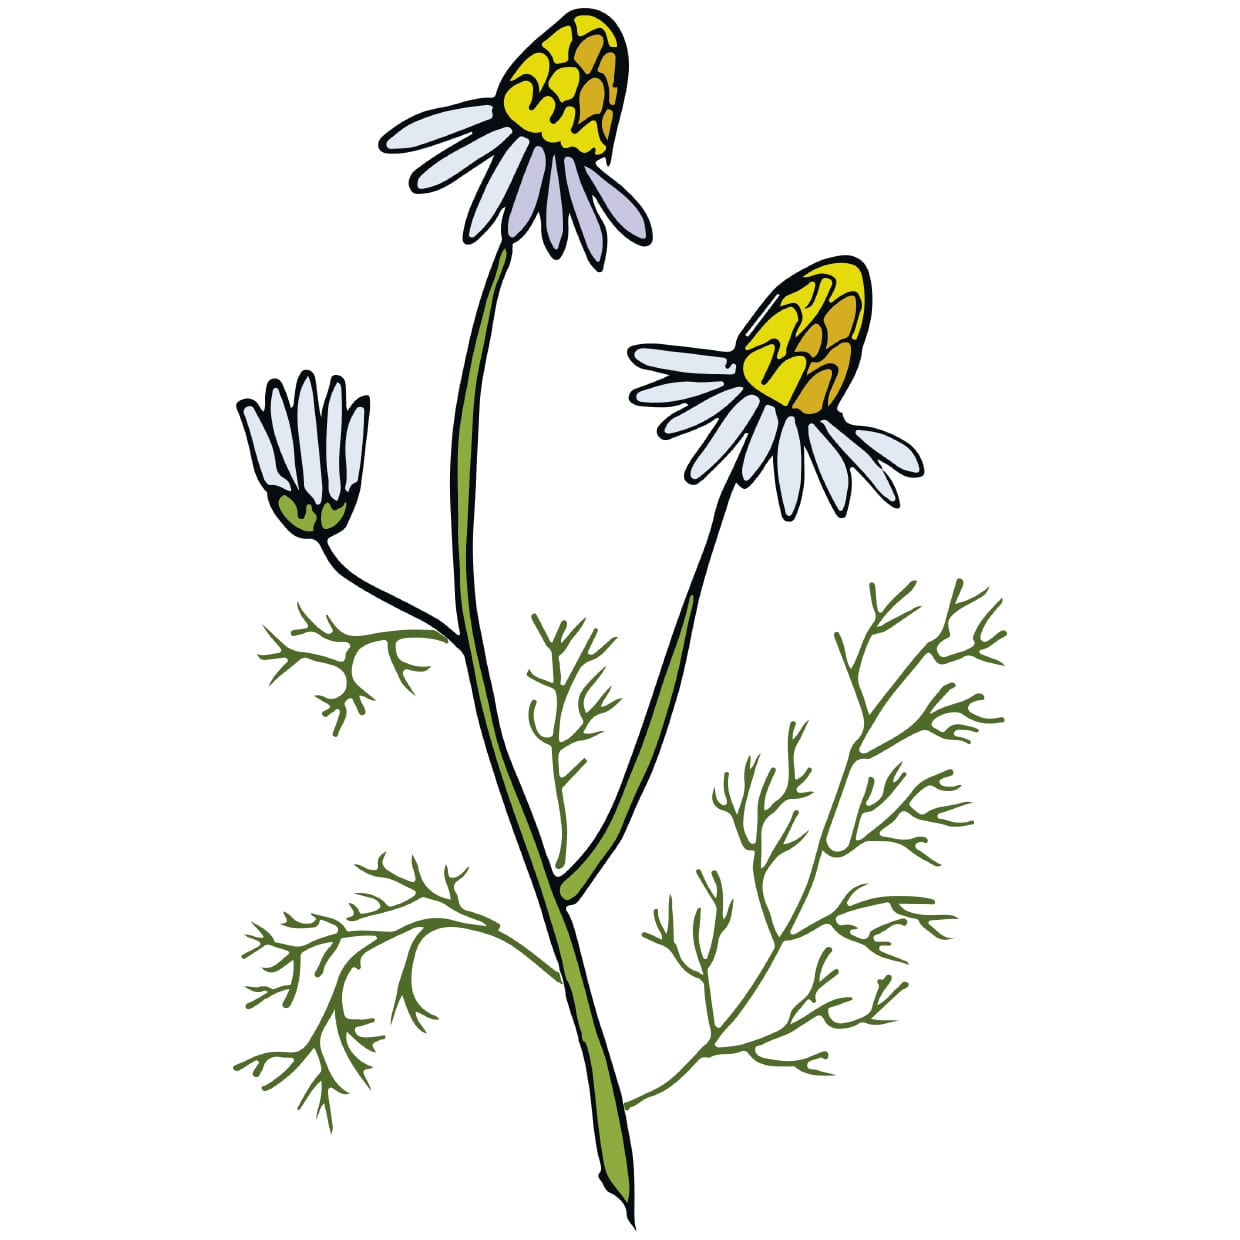 An illustration of a chamomile plant.